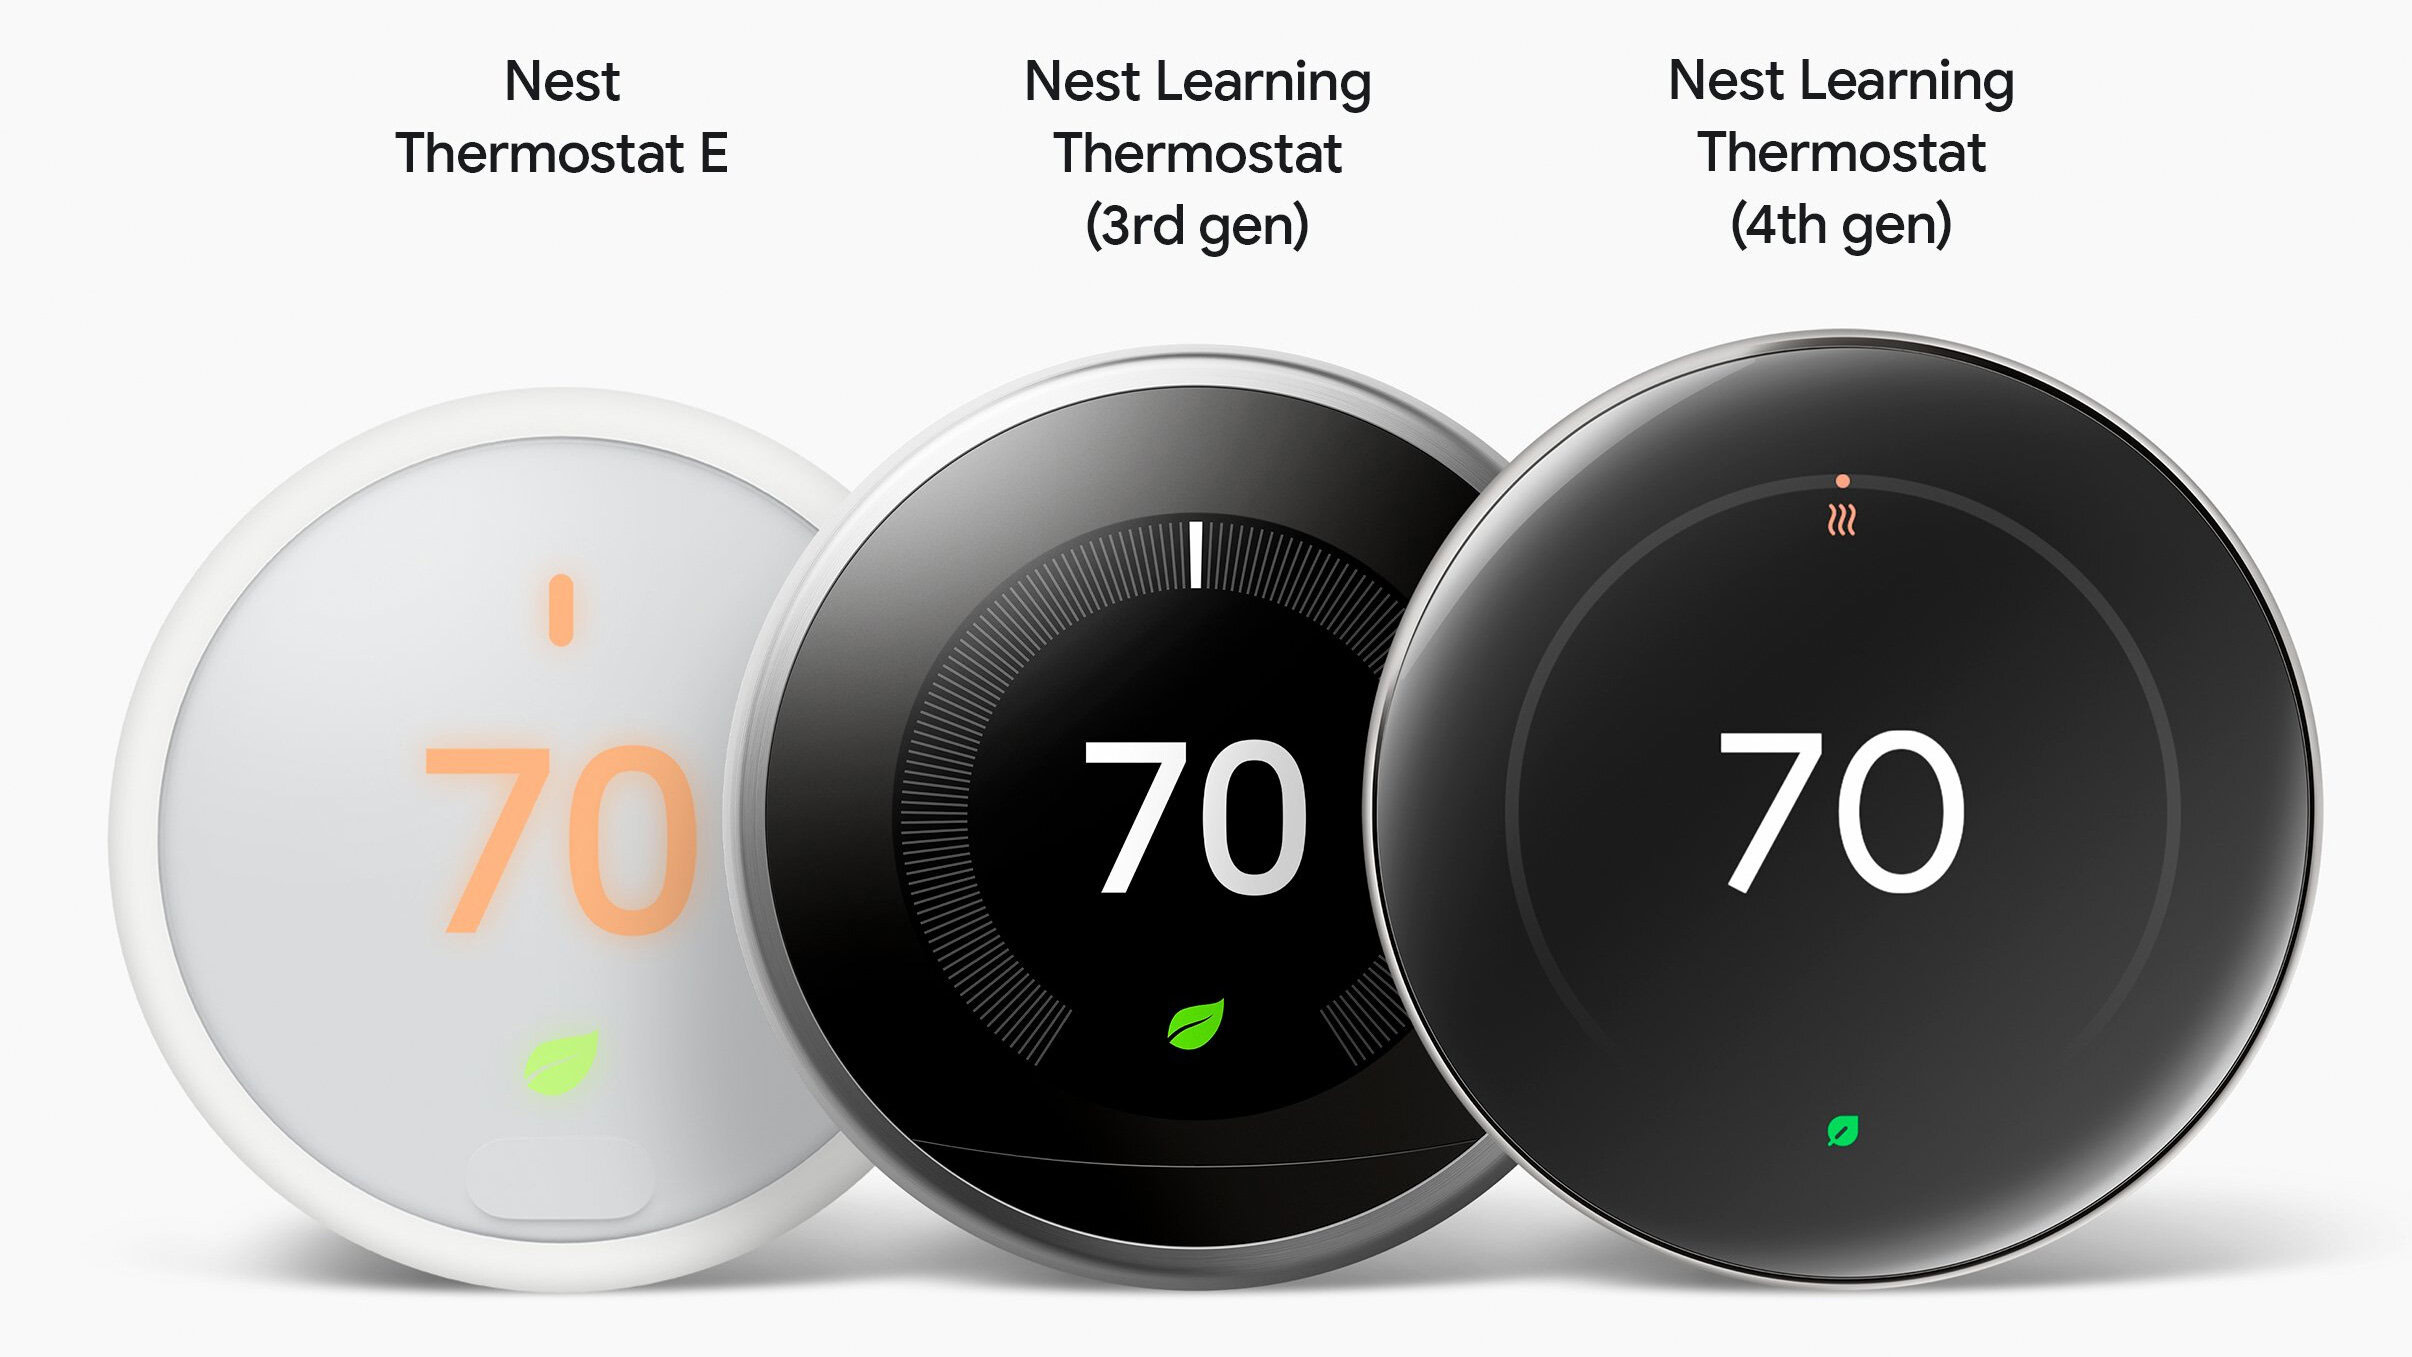 Leaked image of the Nest Learning Thermostat, 4th gen